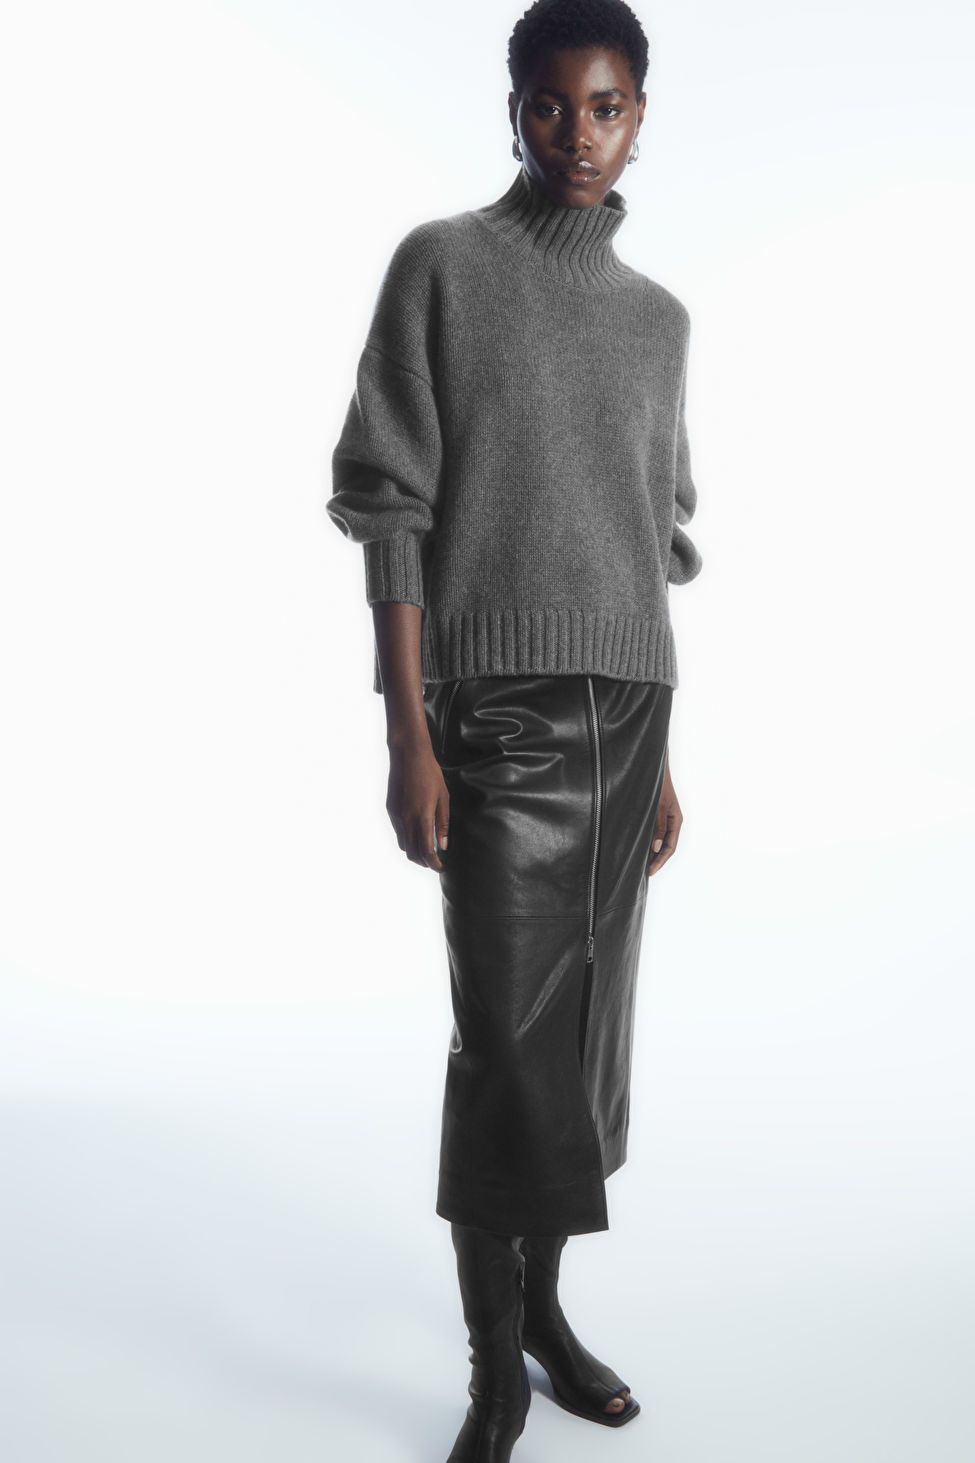 CHUNKY PURE CASHMERE TURTLENECK SWEATER - DARK GRAY - Knitwear - COS | COS (US)